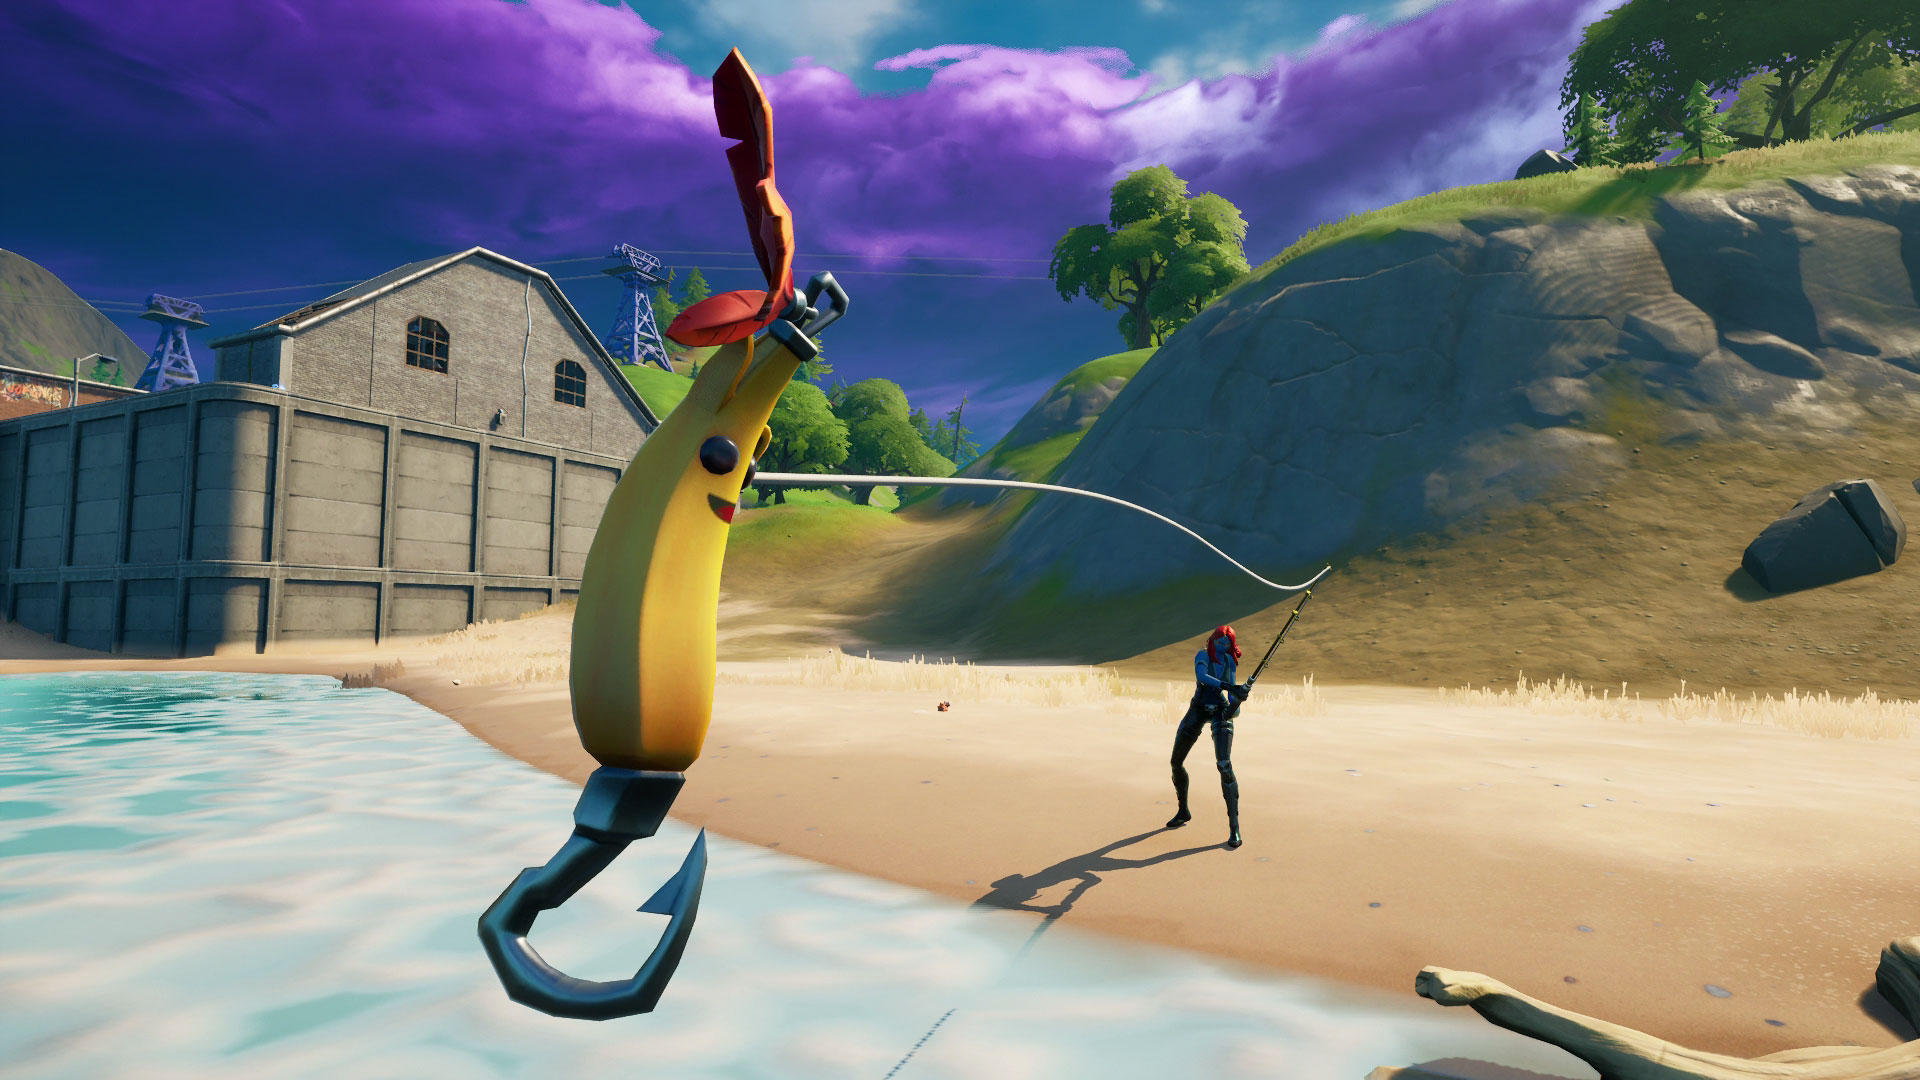 Fortnite Pro fishing rod: How to get the best fishing rod on the island